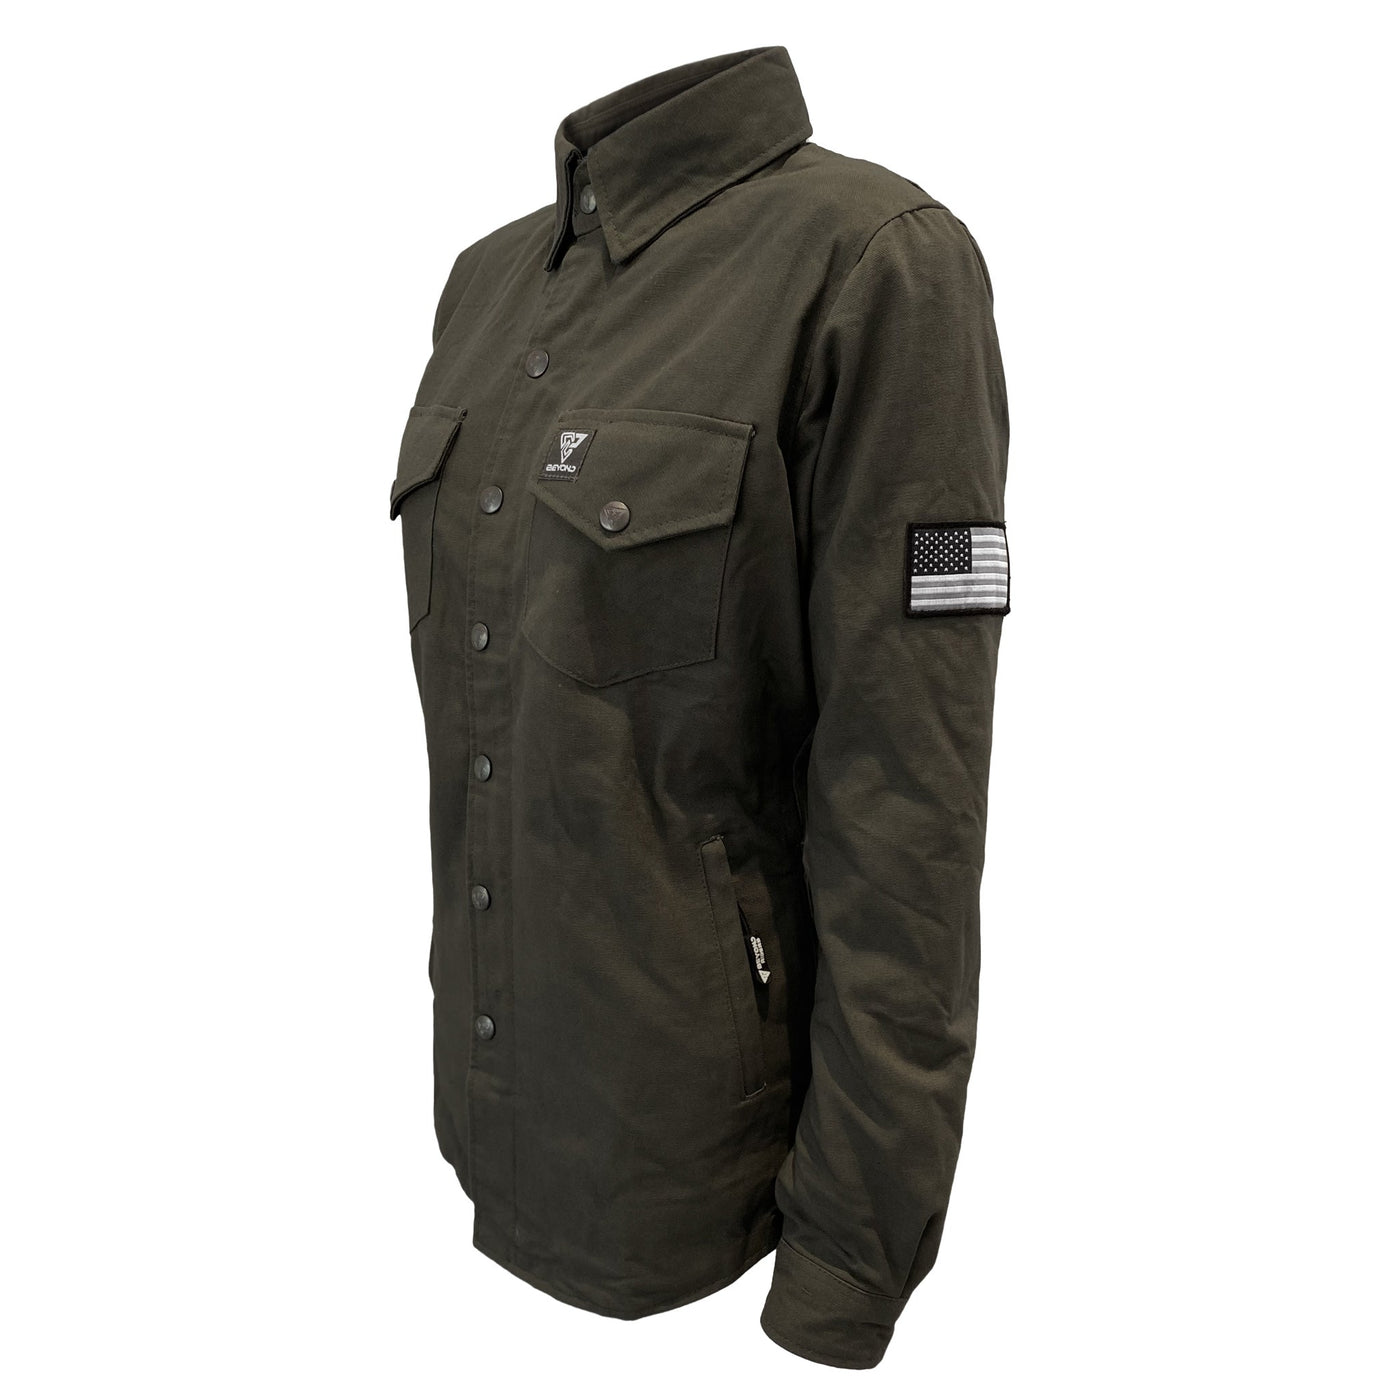 Protective Canvas Jacket for Women with Pads - Army Green